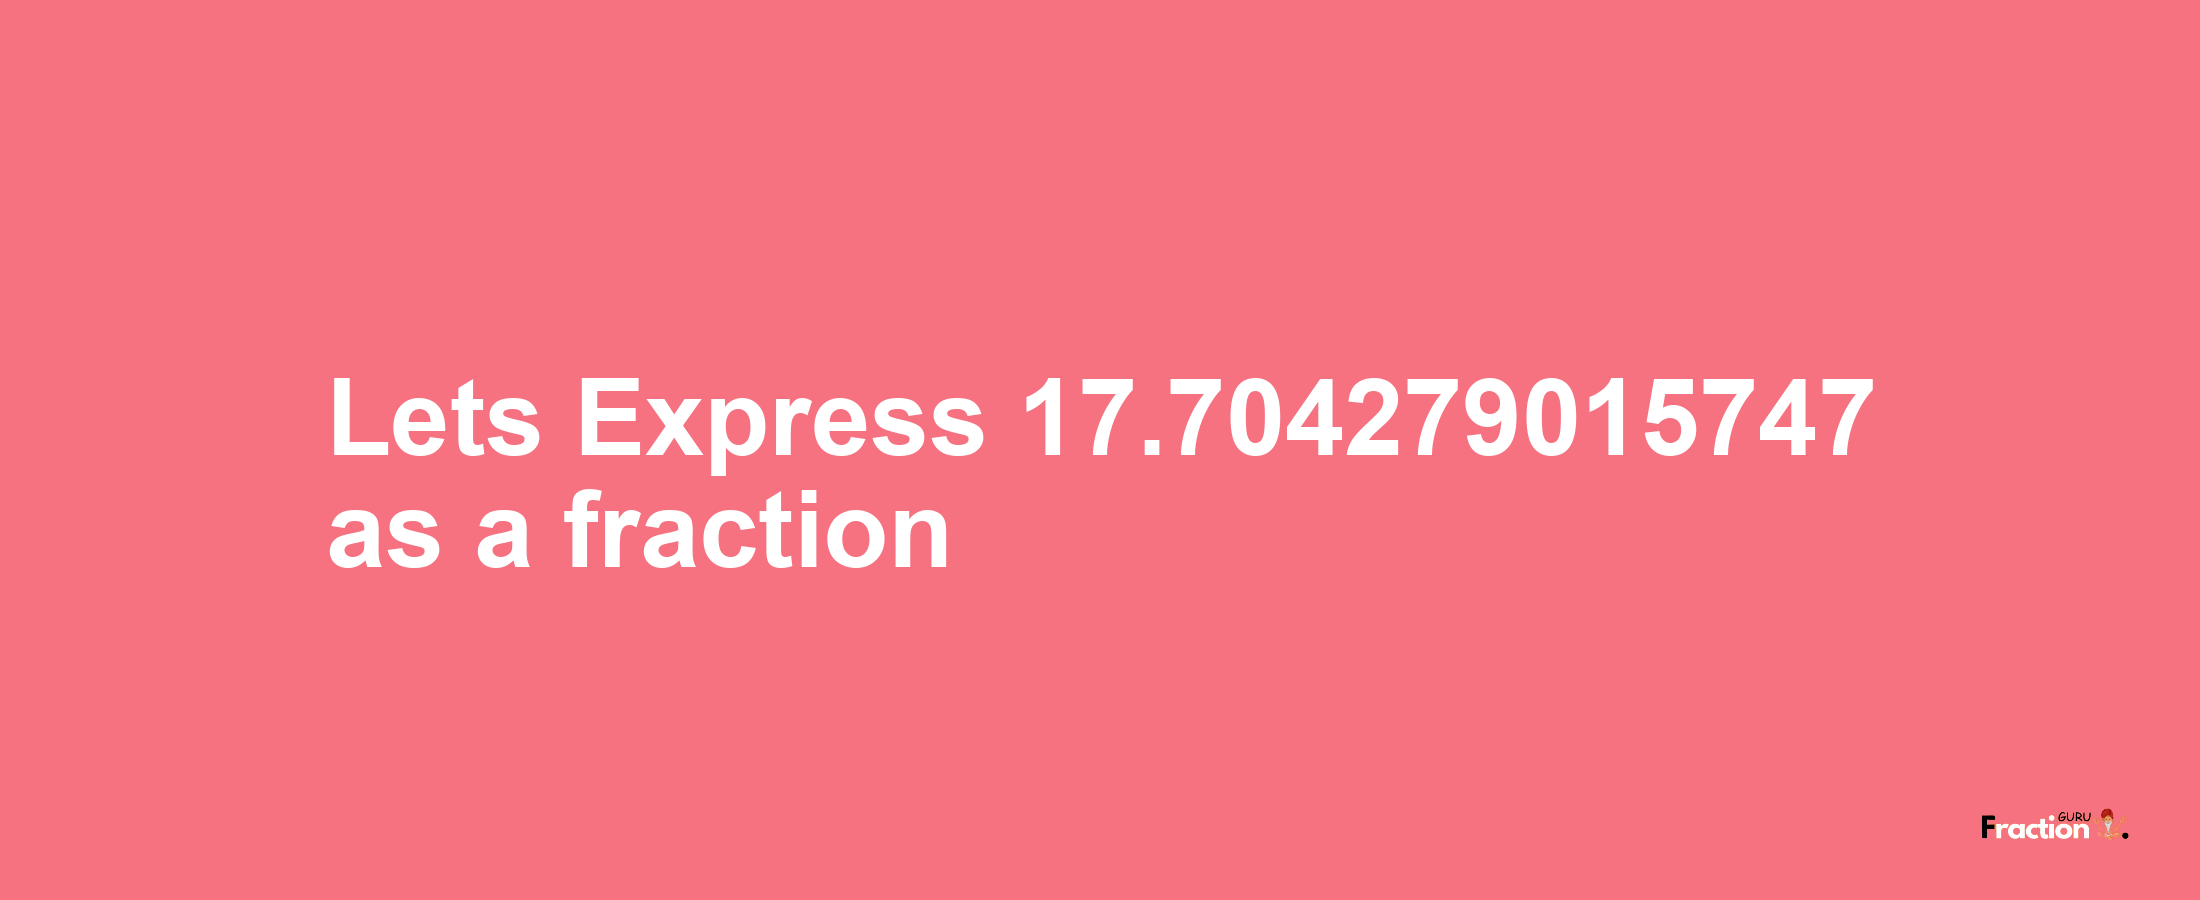 Lets Express 17.704279015747 as afraction